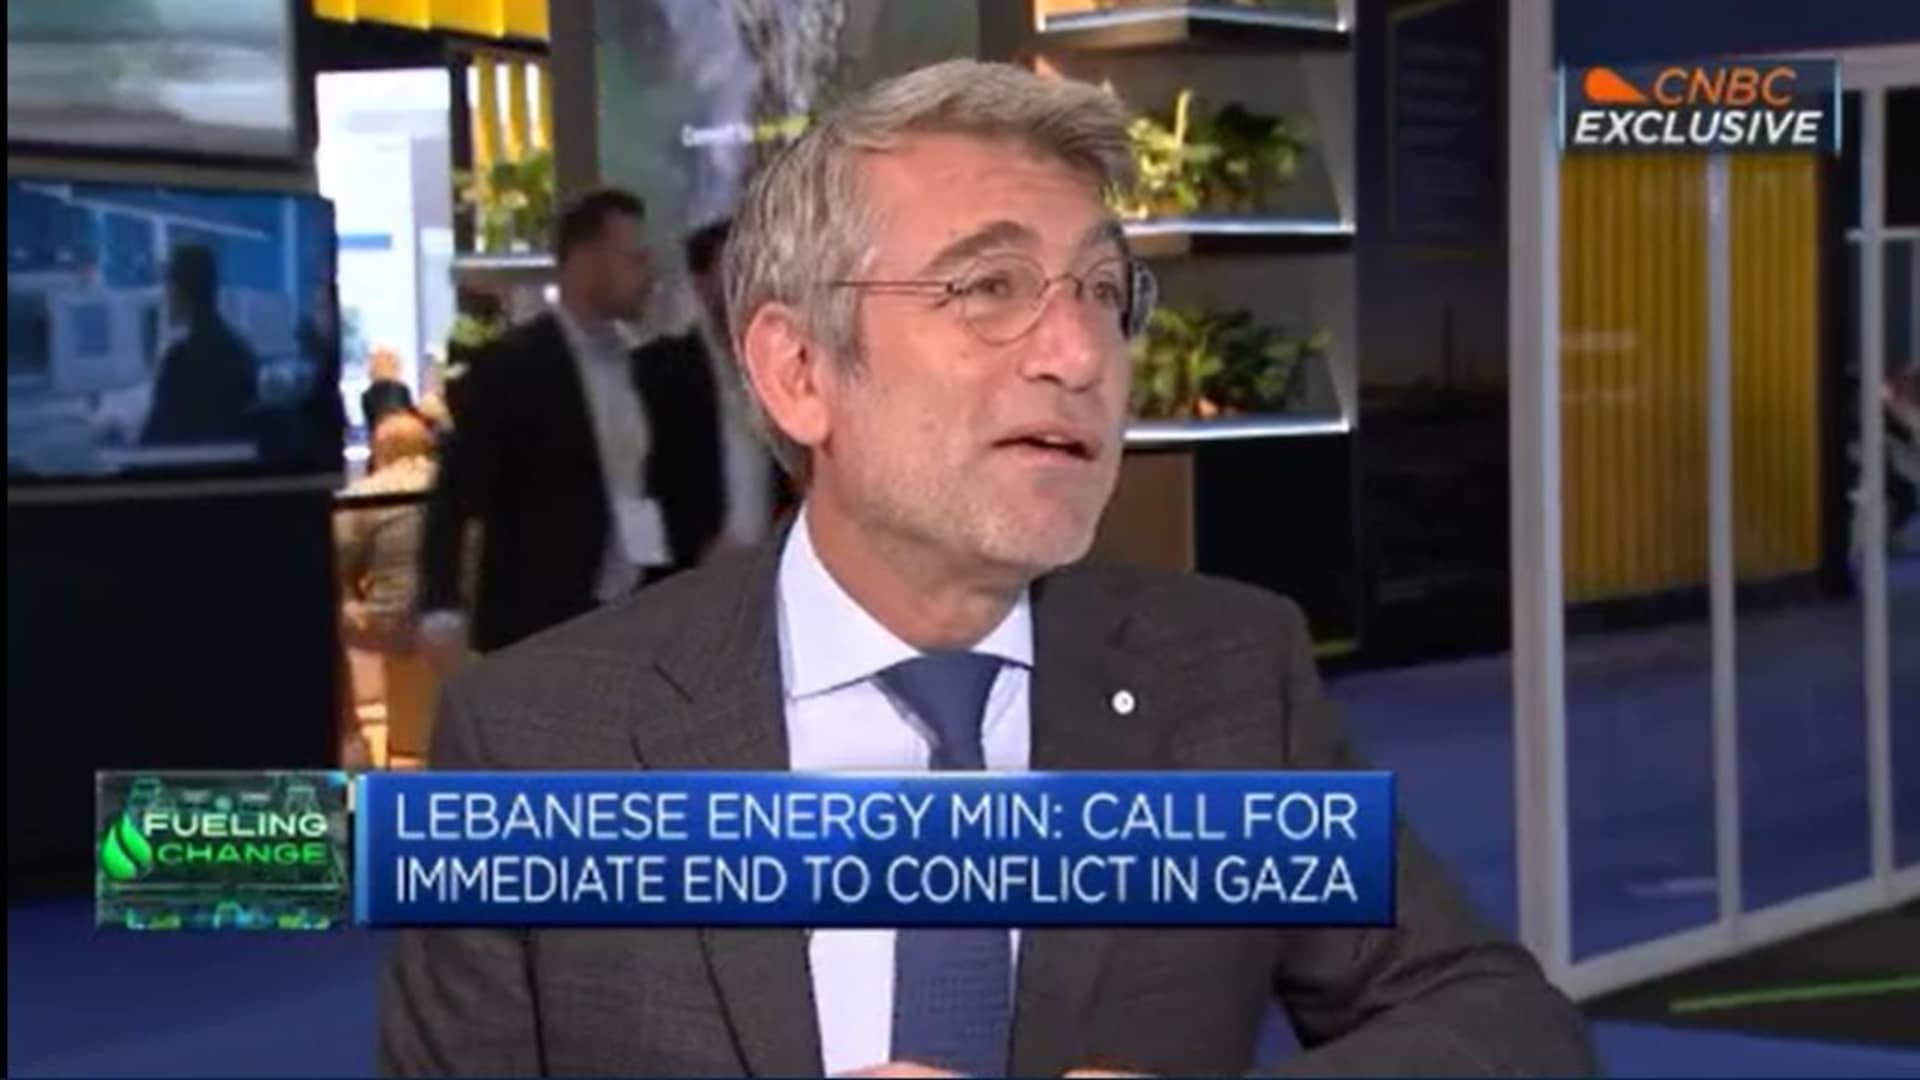 There is no progress without peace in the Middle East, says Lebanon’s energy minister [Video]